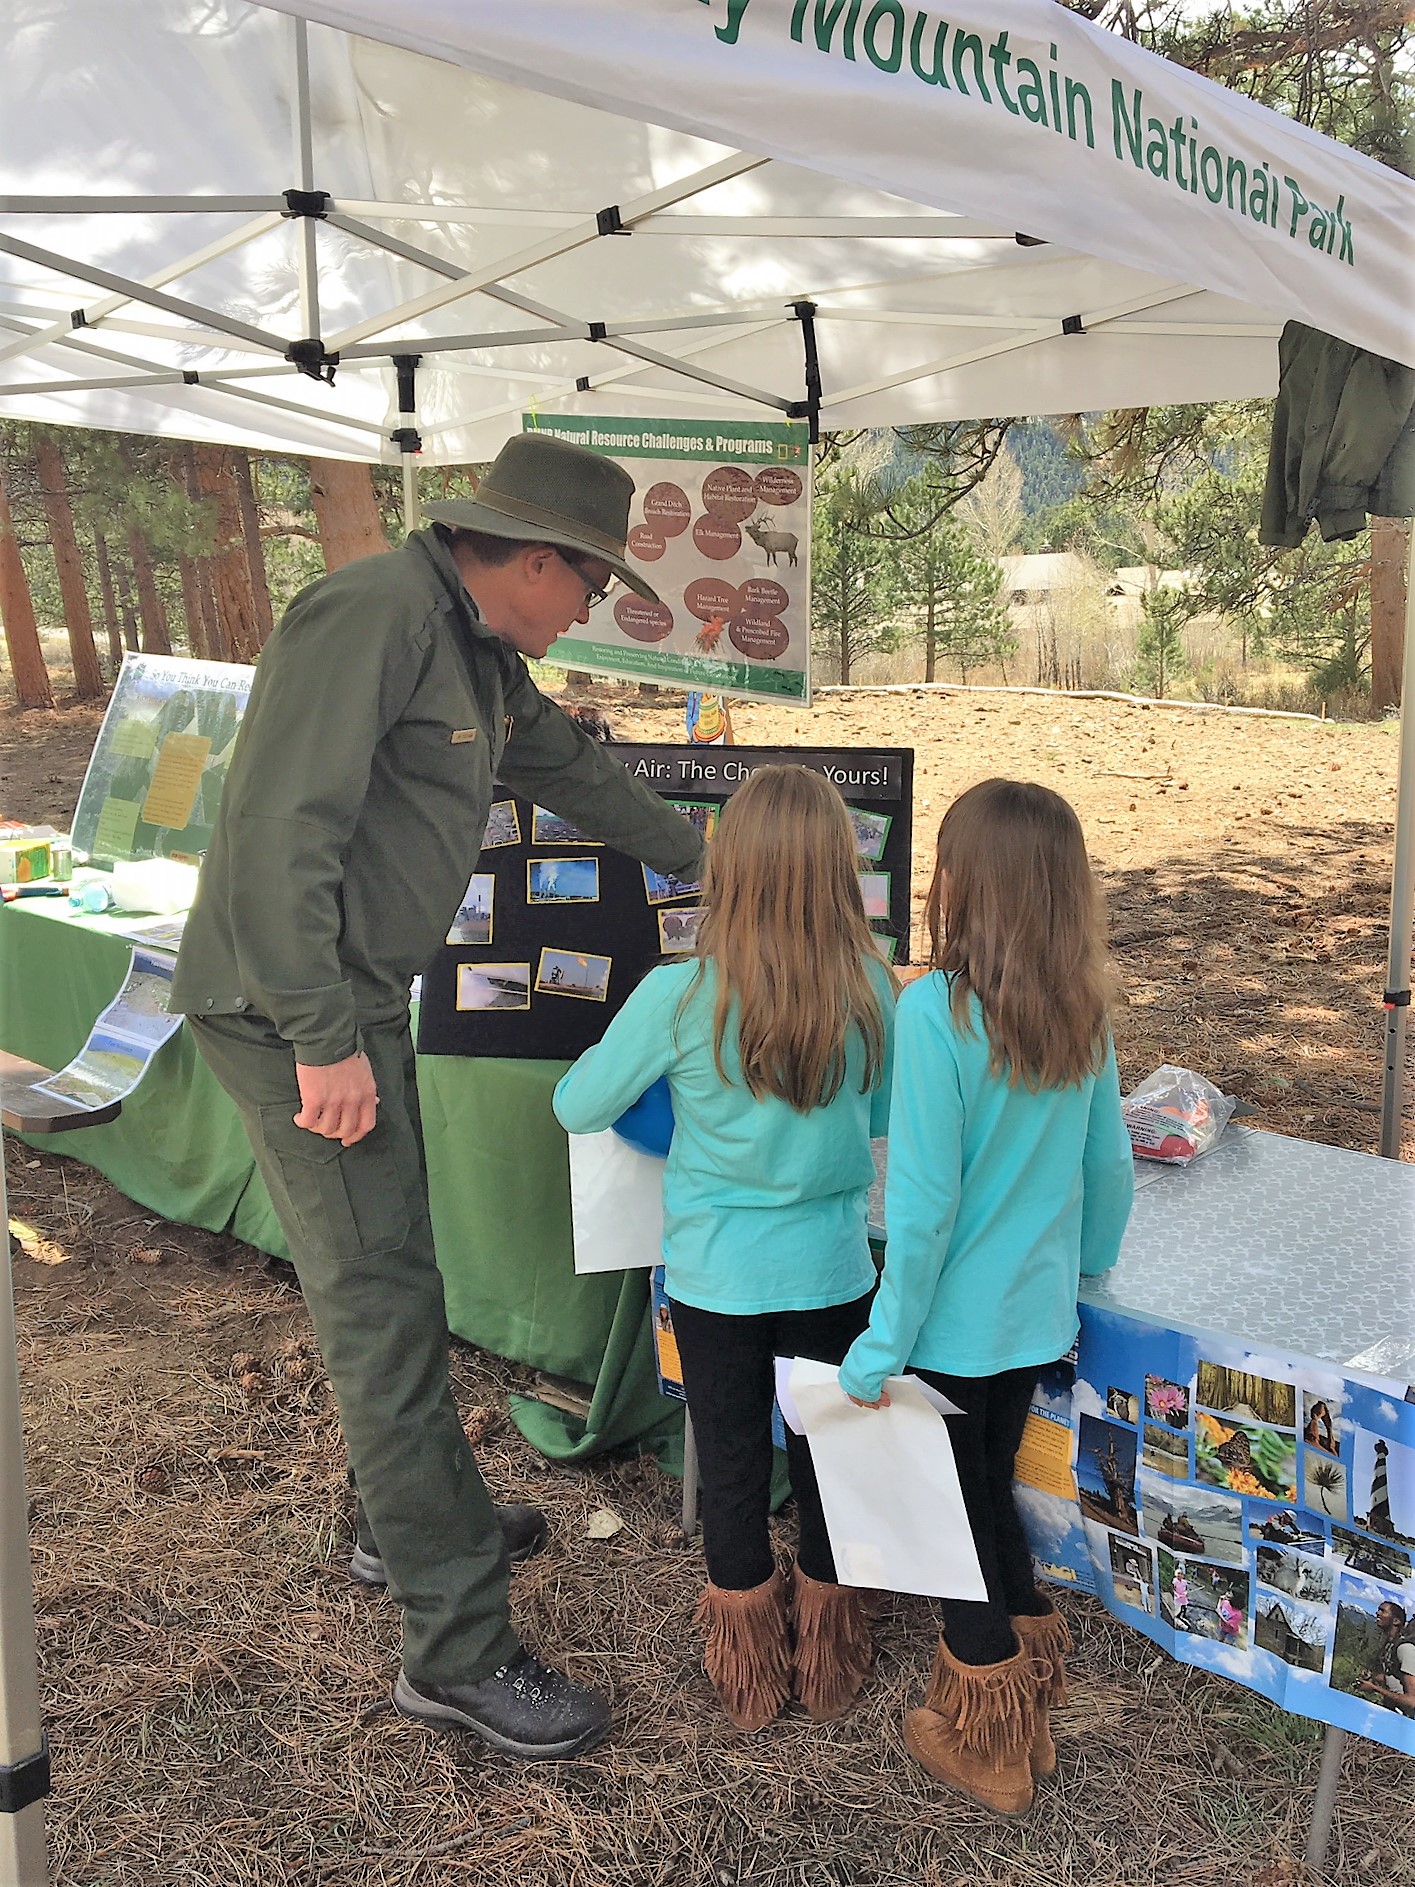 Park visitors participating in Earth Day activities.